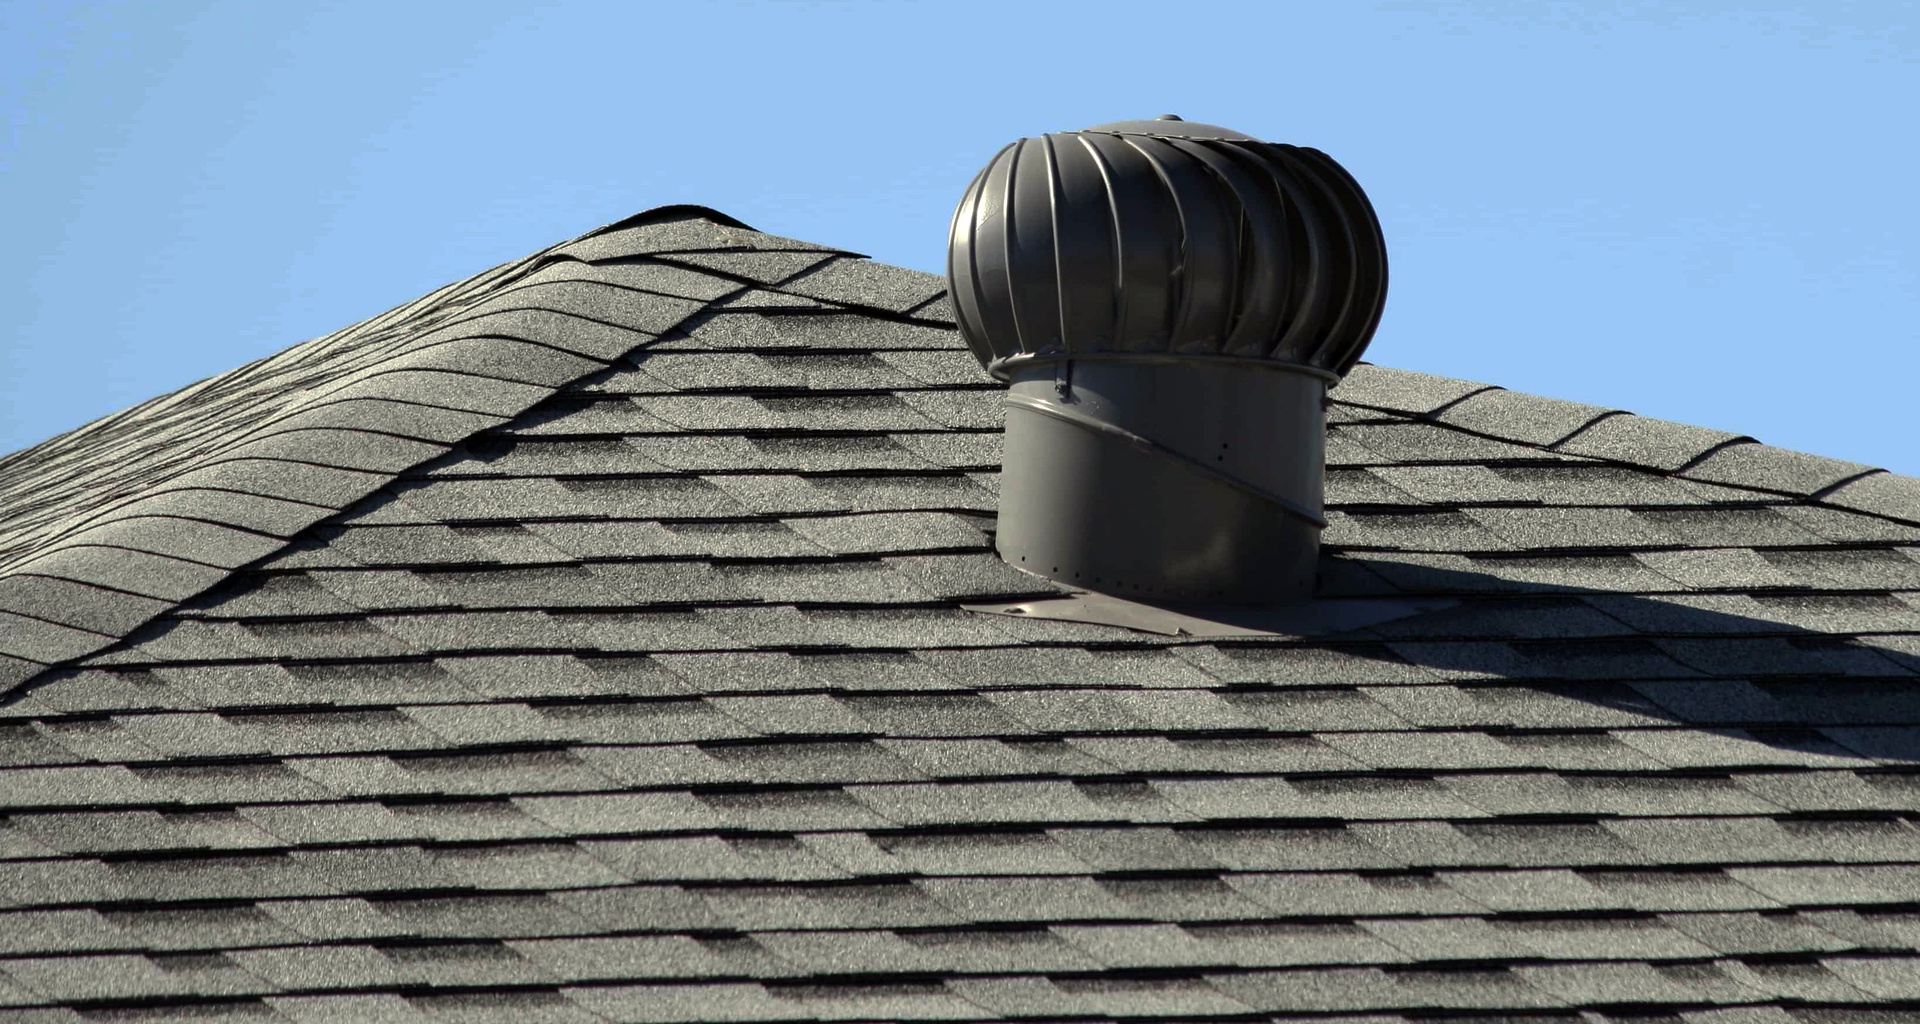 Roof Ventilation & How to Vent Roofs - Methods, Types, Fans - Ecohome